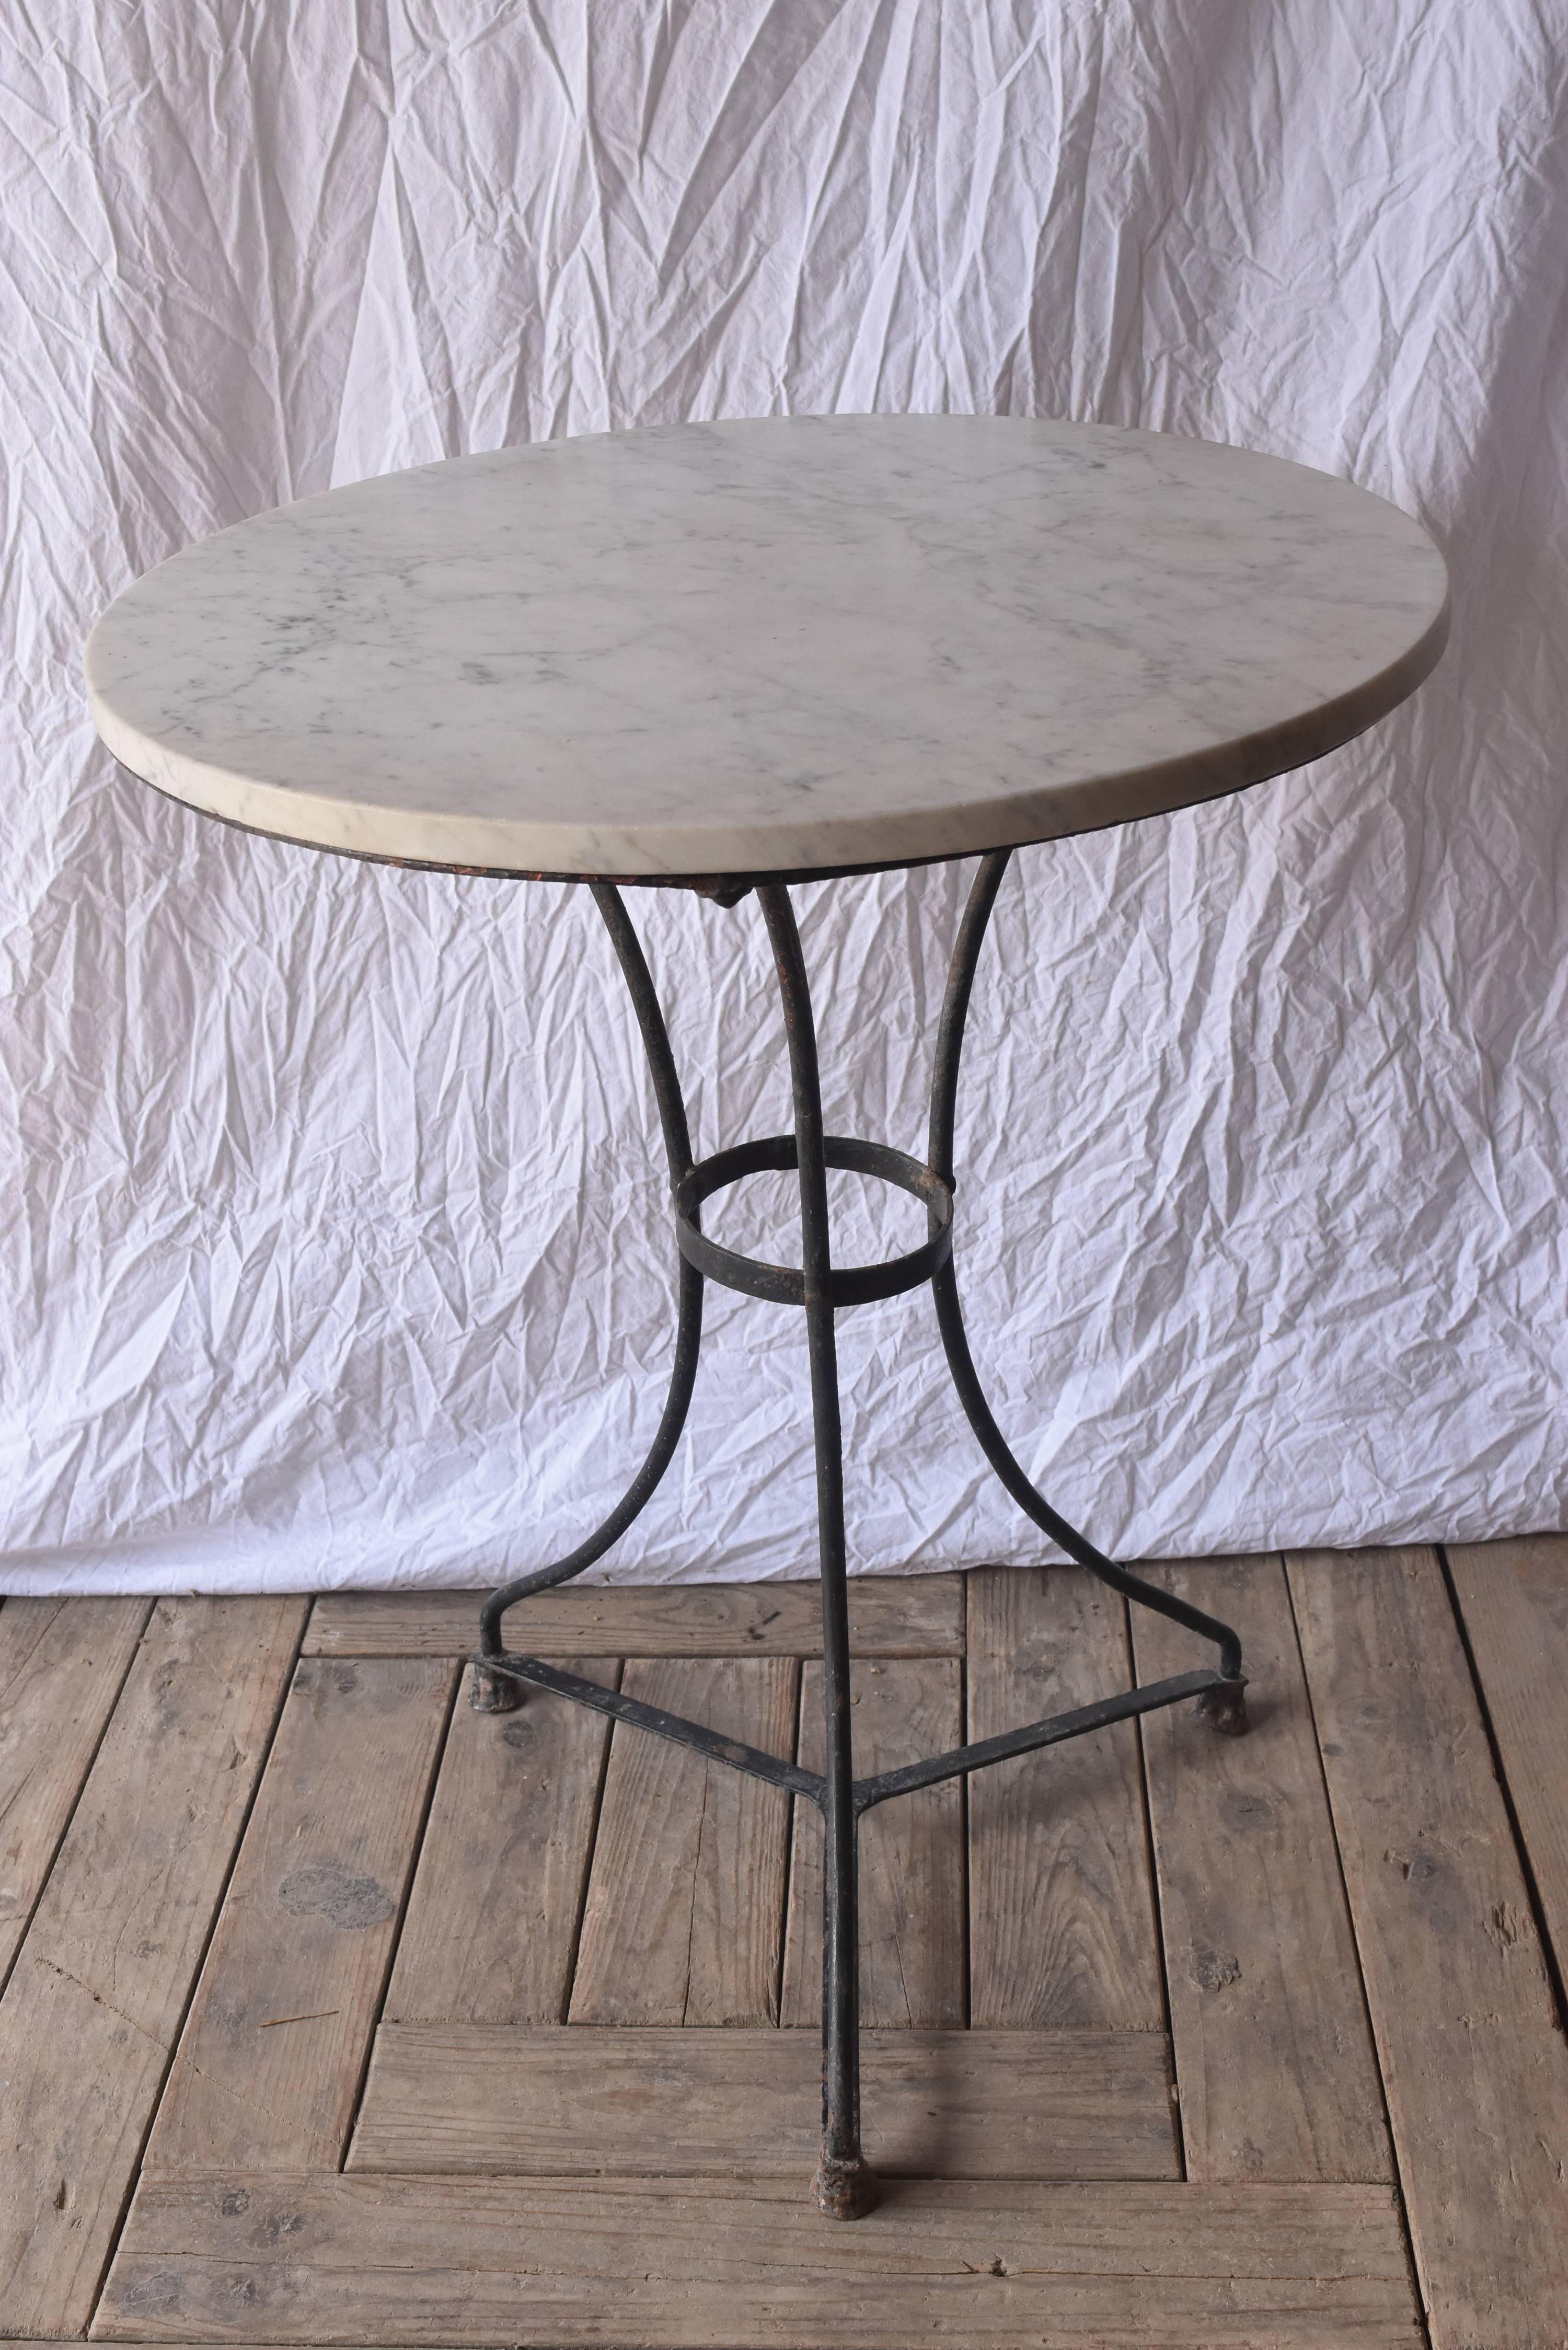 Late 19th Century French Iron Bistro Table Painted Black with White Marble Top 3